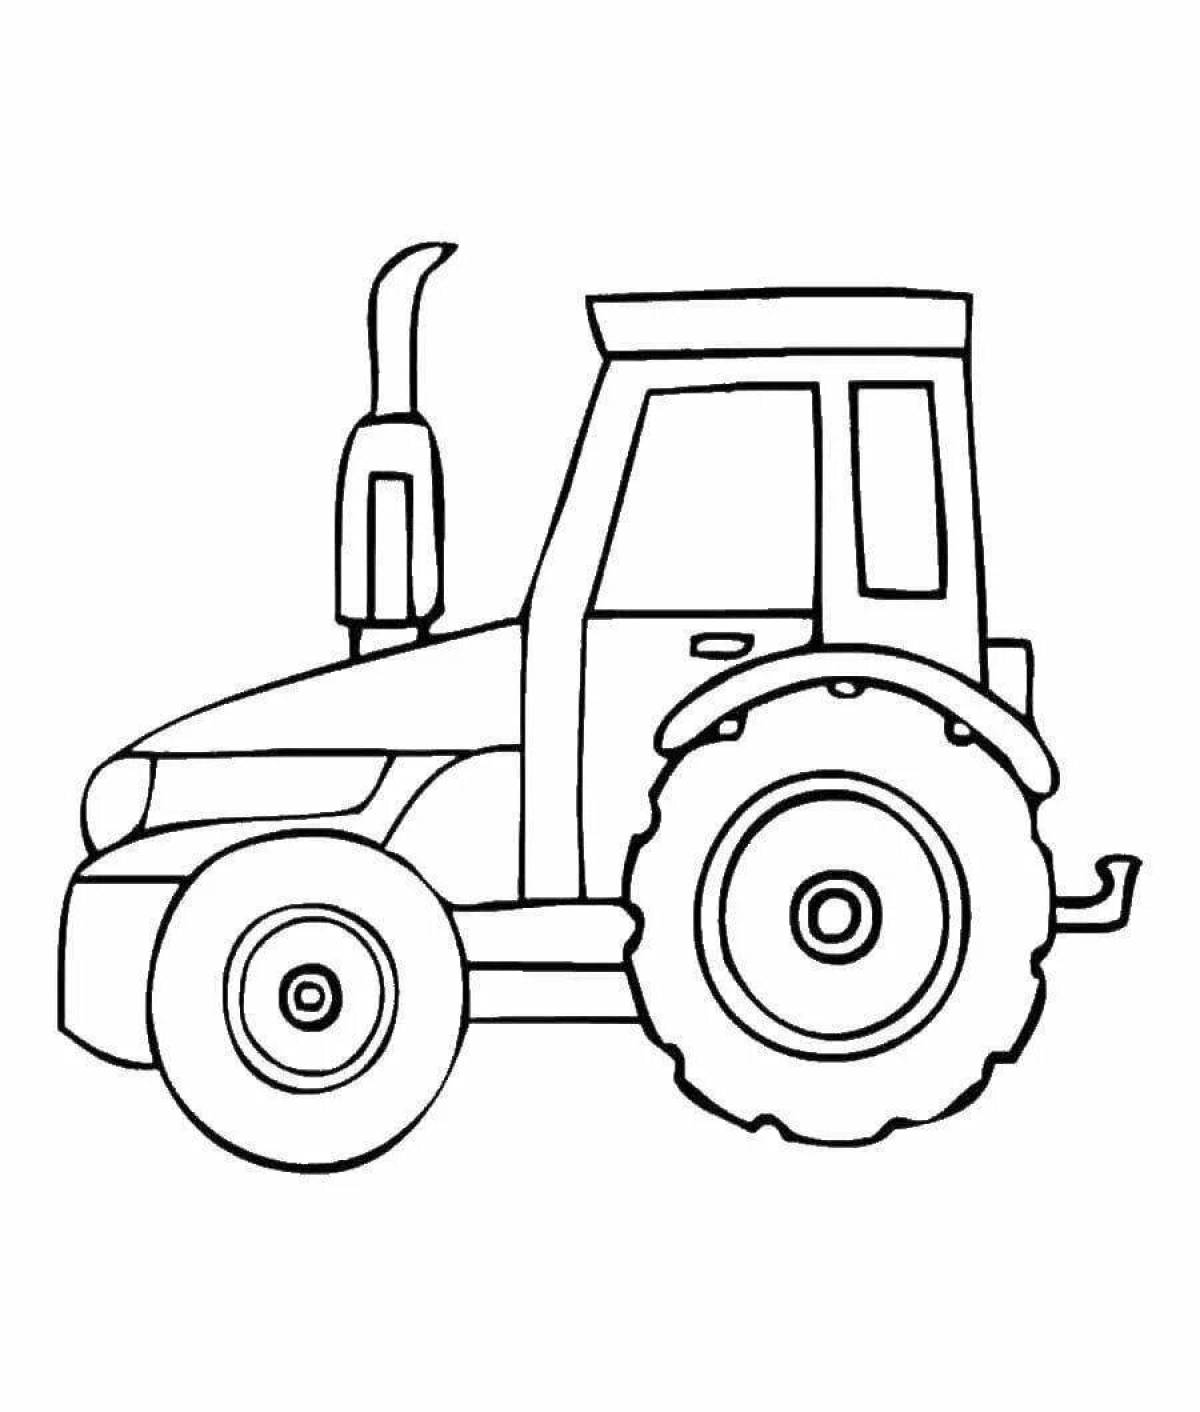 Ambitious drawing of a tractor